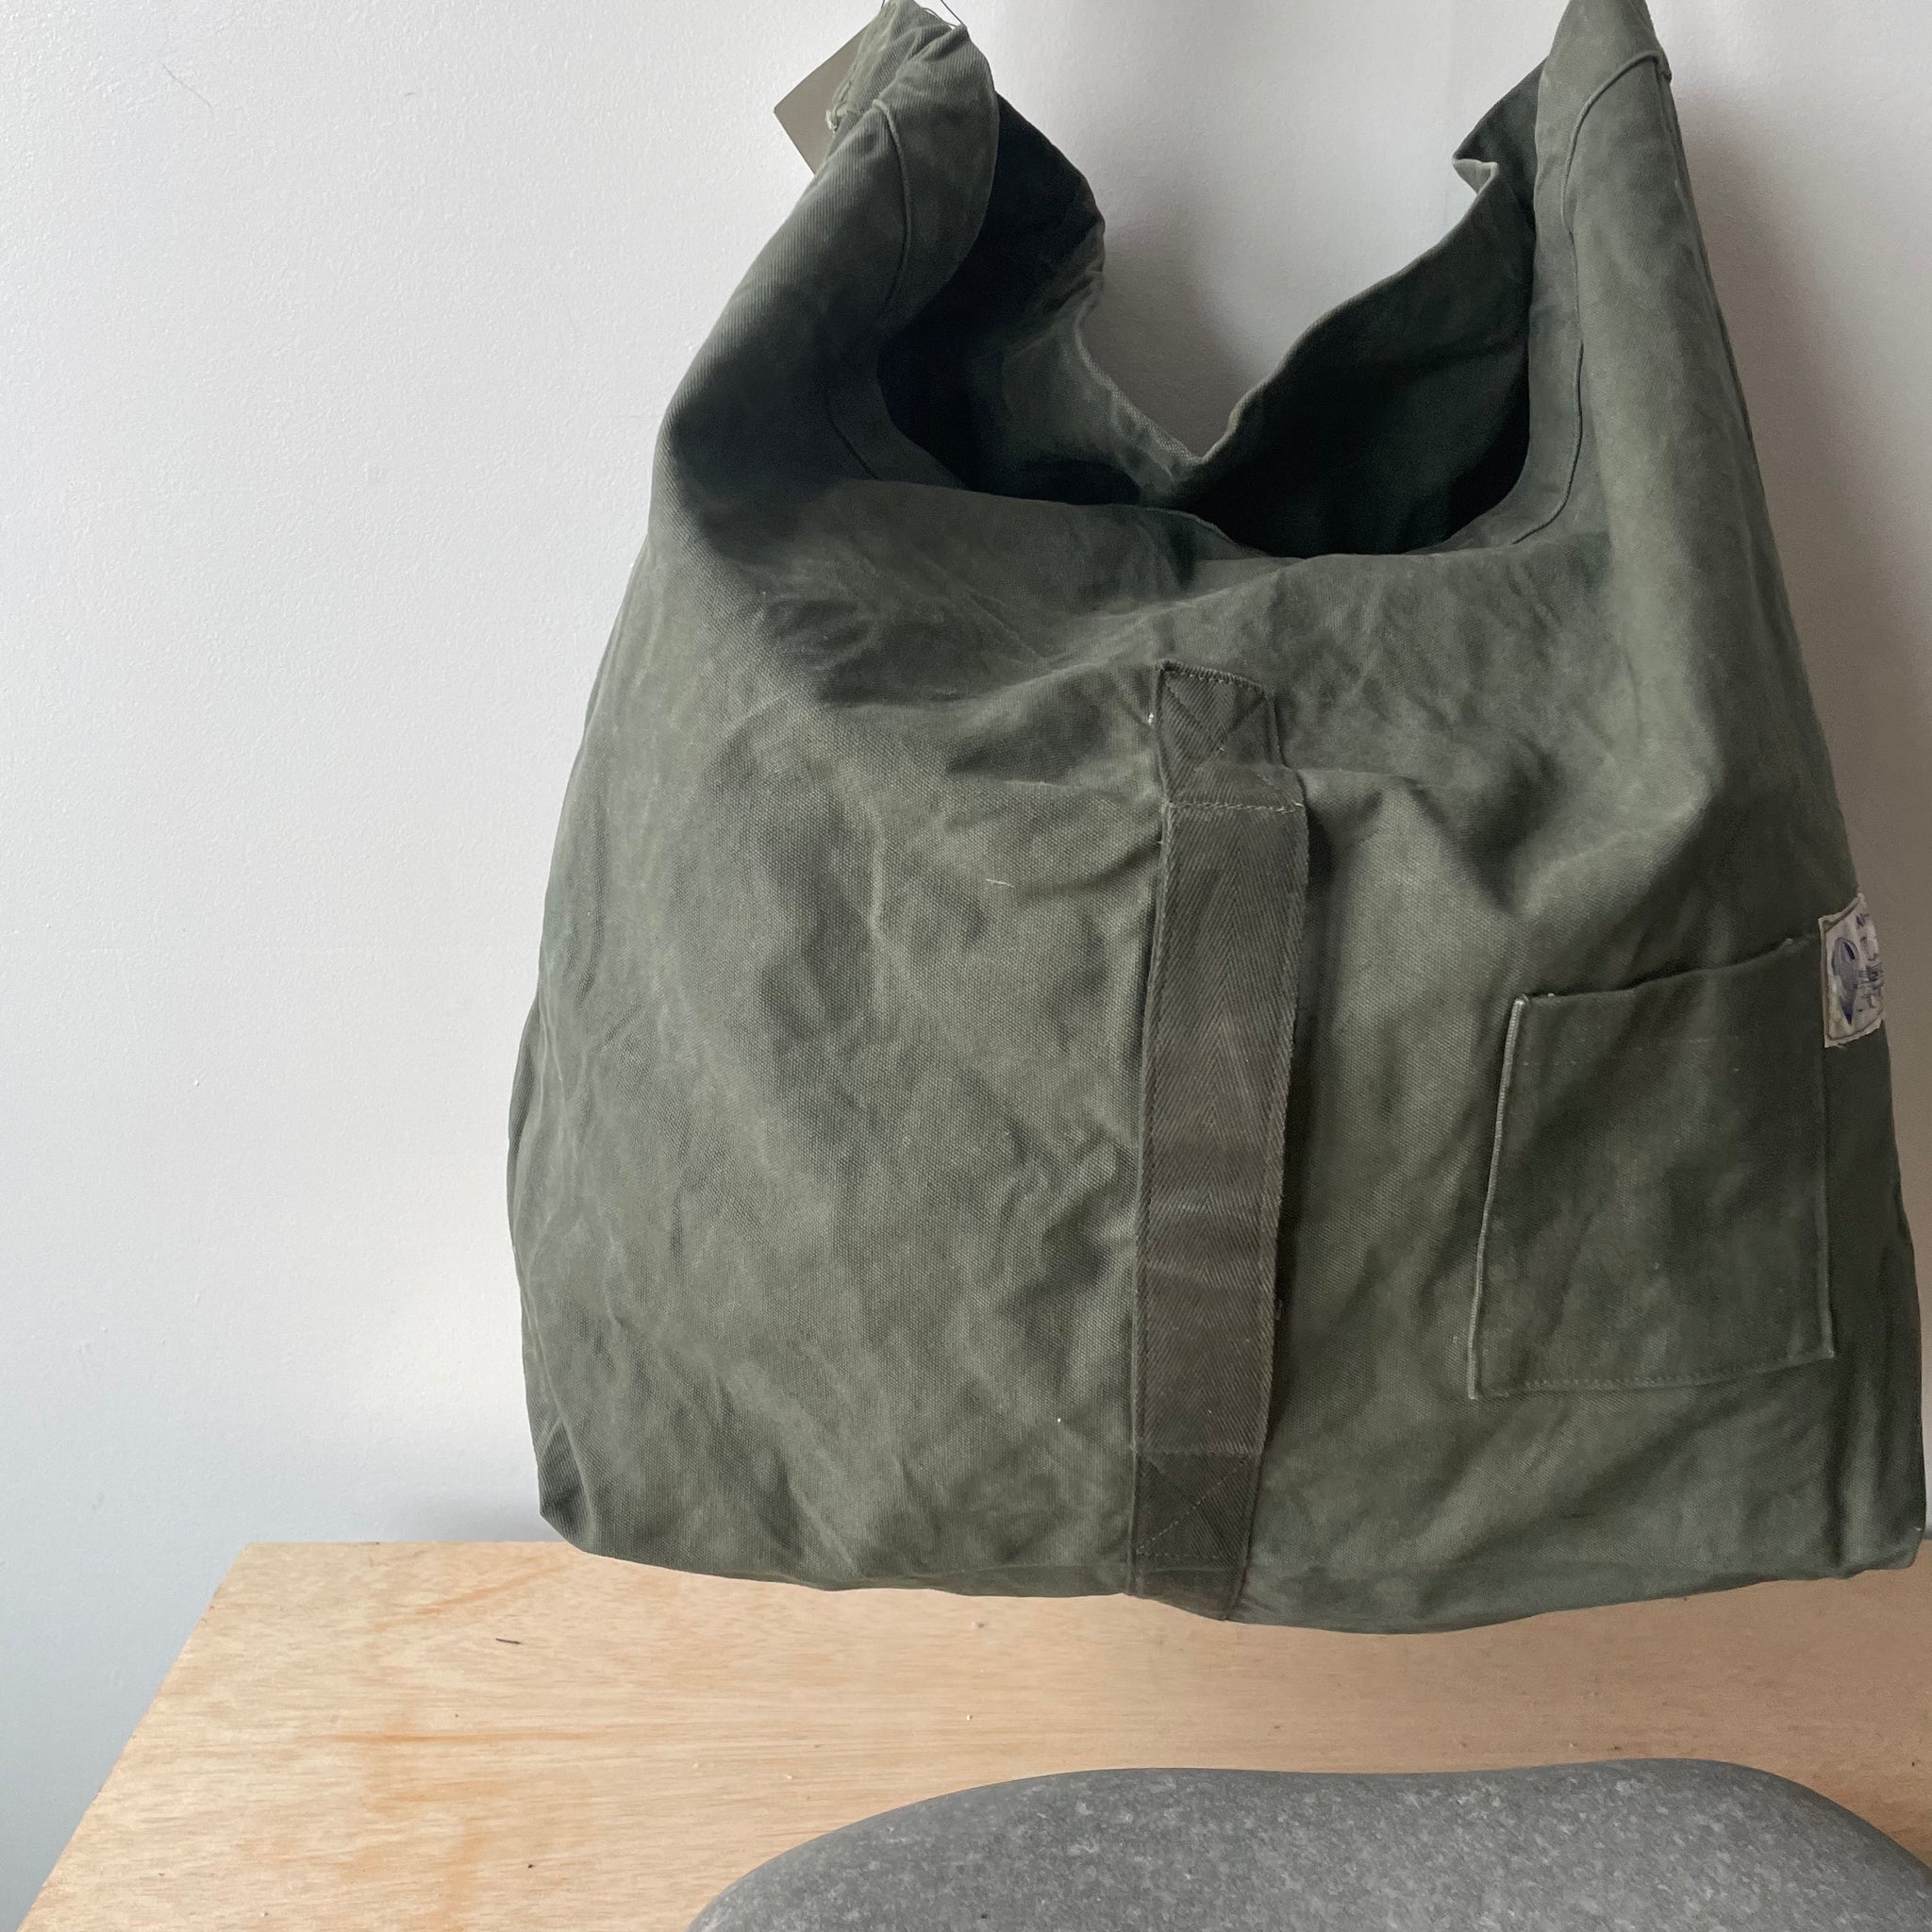 Minimalist Shoulder Tote Bag with Purse Made With Recycled